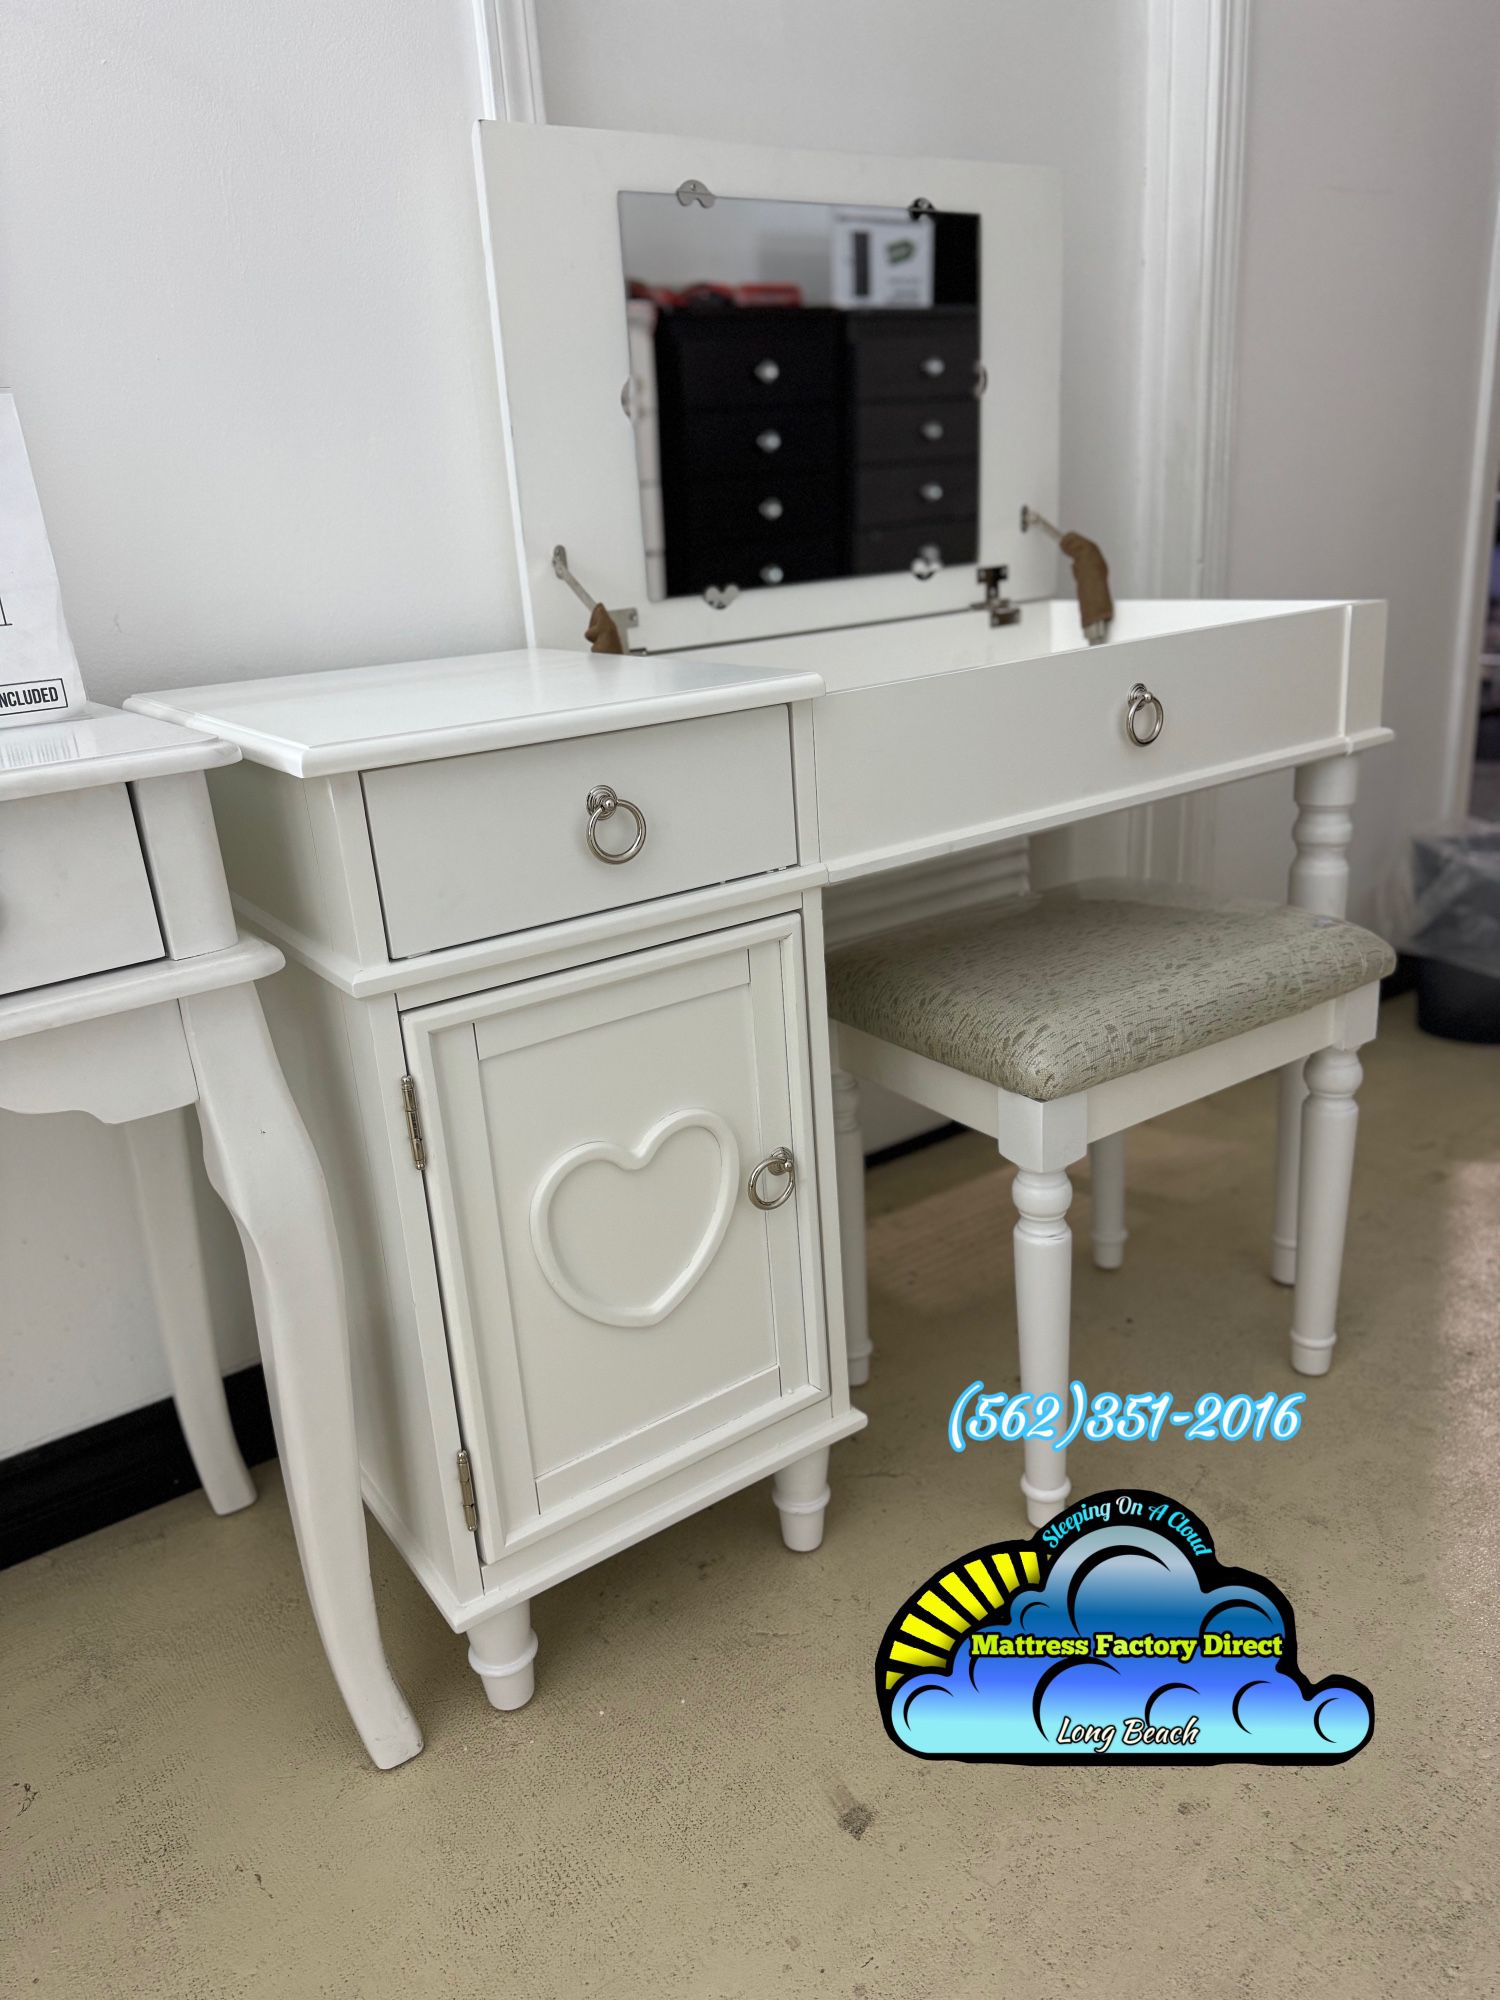 New Small White Wood Vanity With Mirror Inside & 2 Storage Drawers 